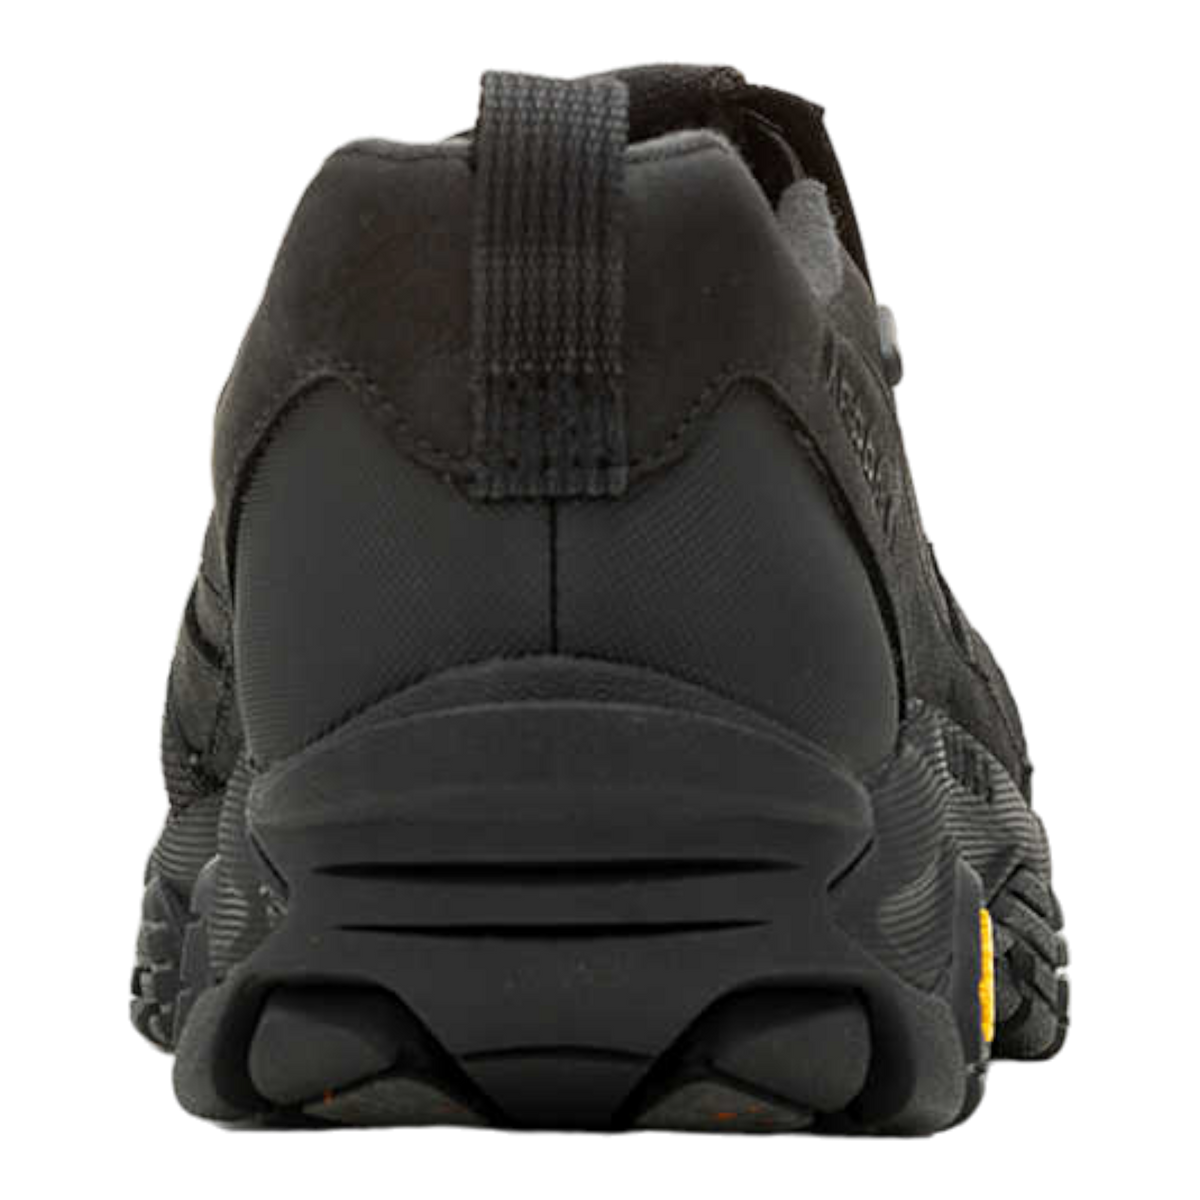 Women's ColdPack 3 Thermo Moc Waterproof - Dardano's Shoes